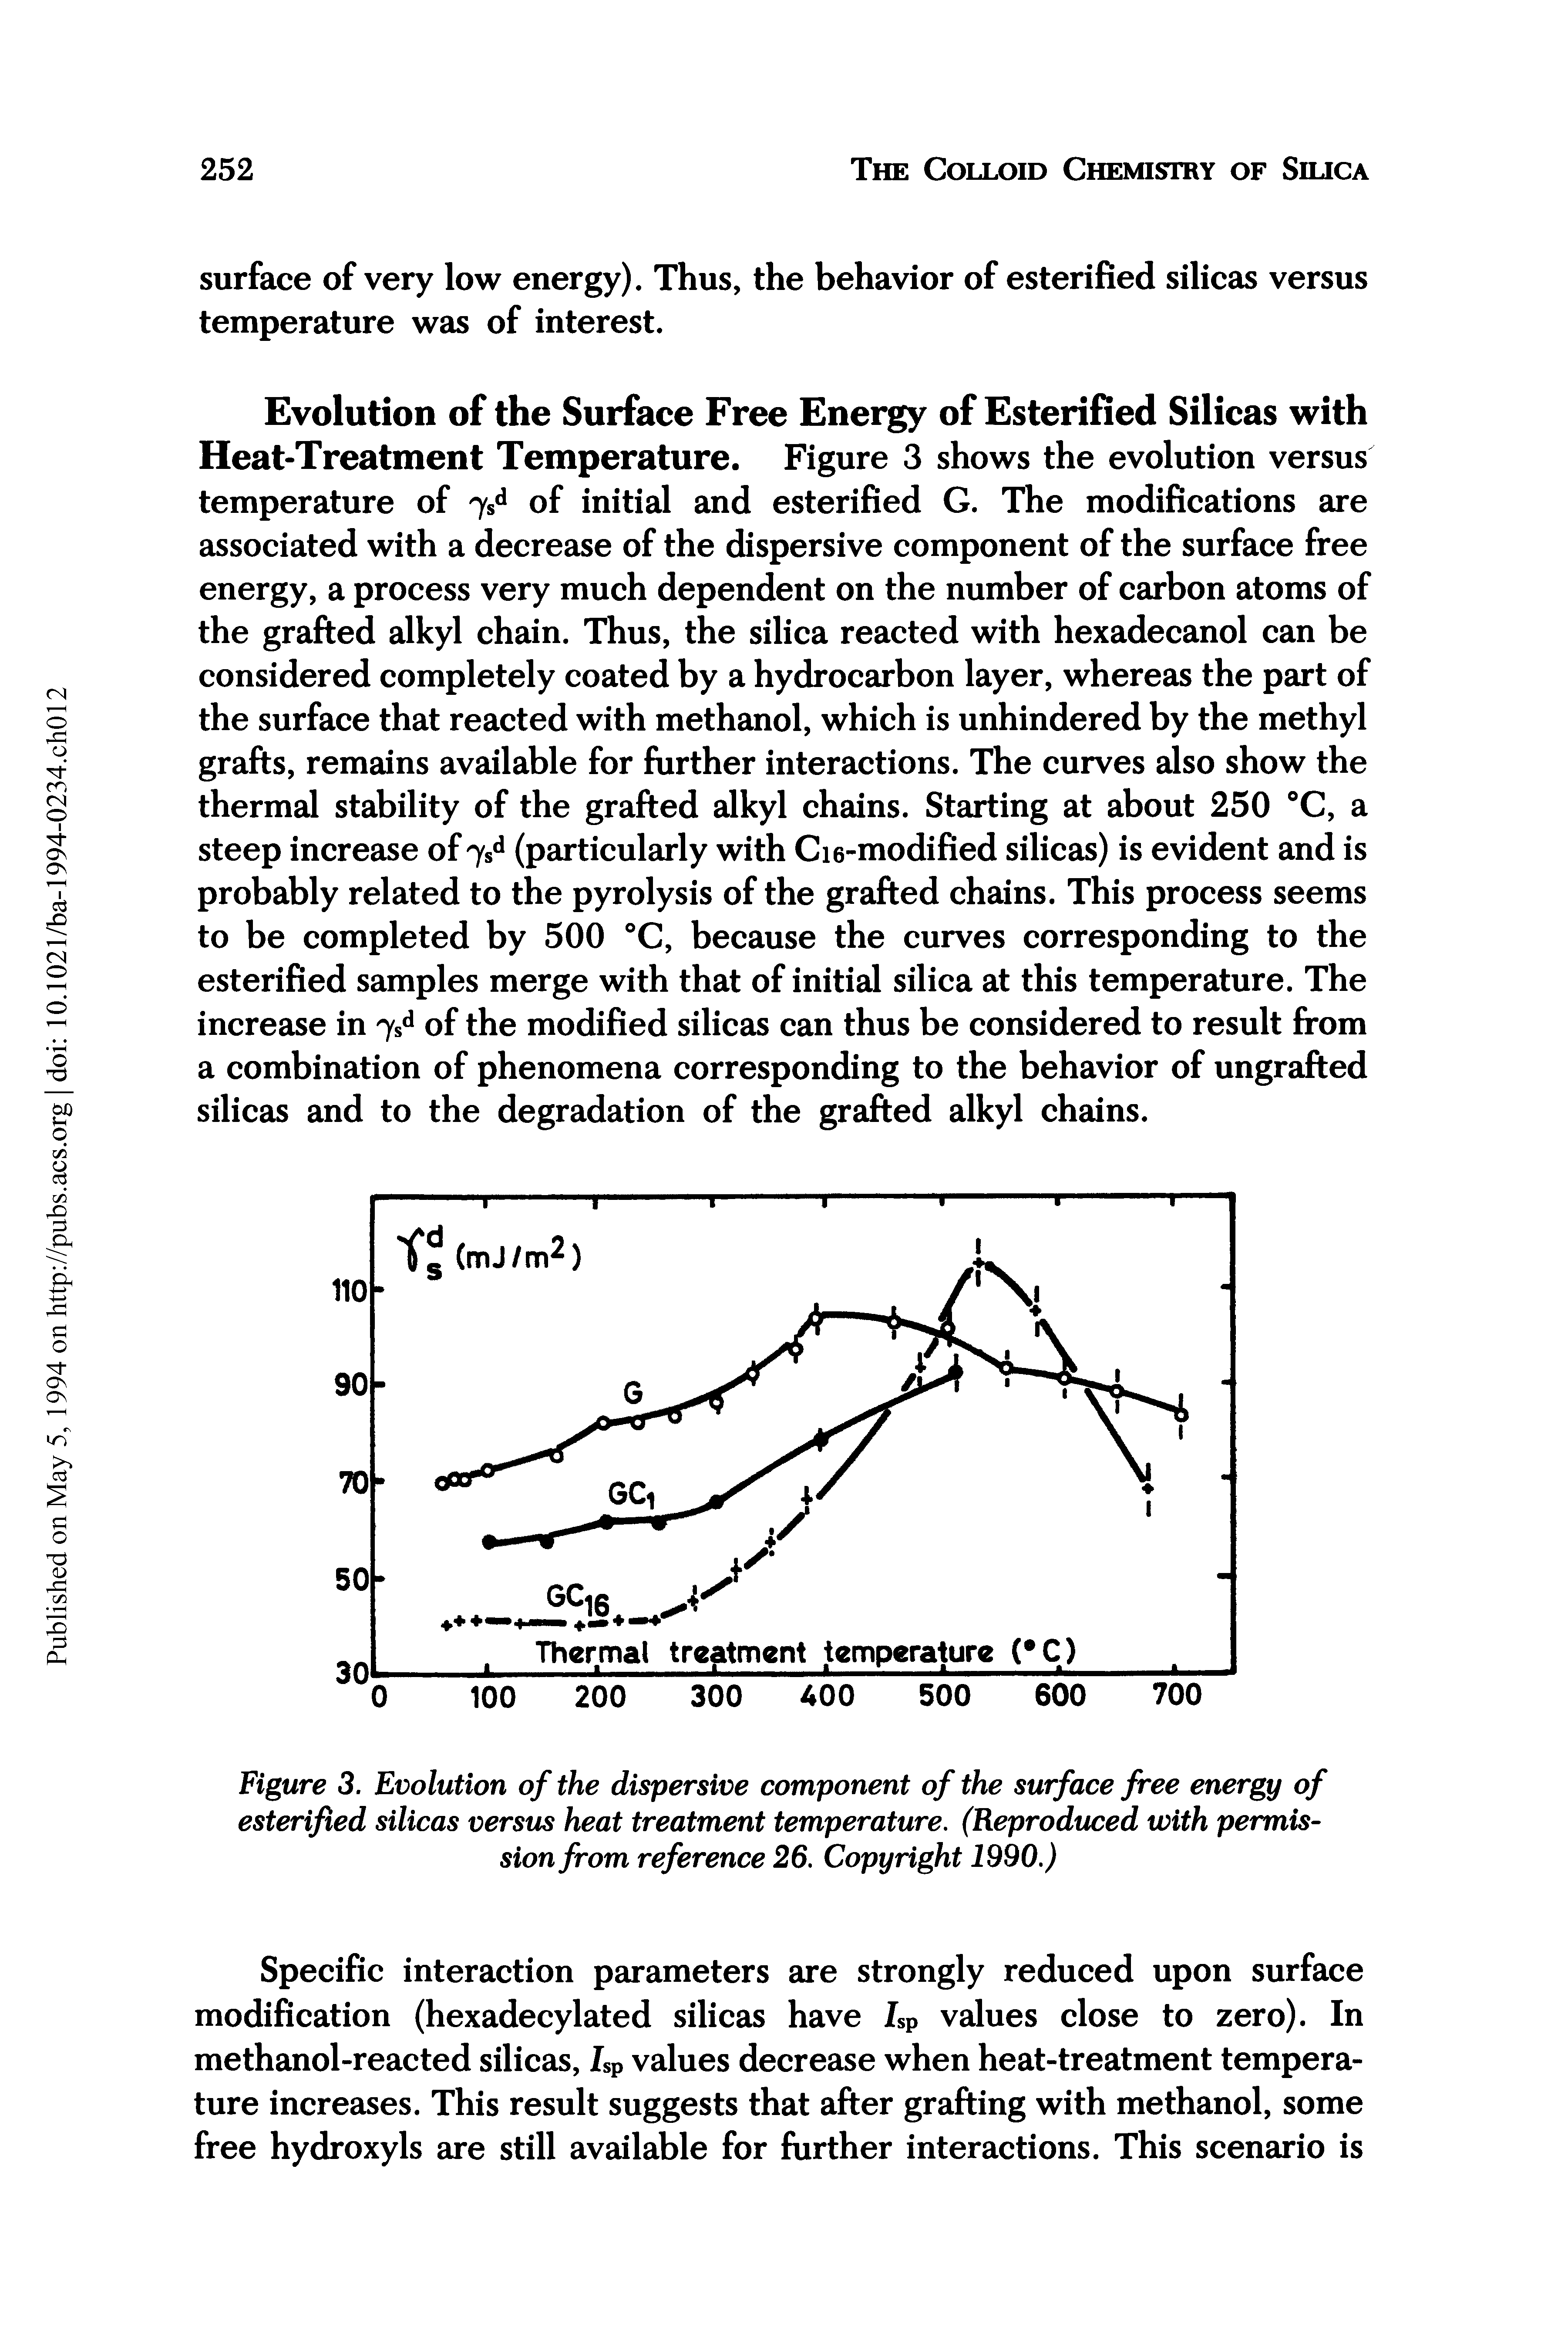 Figure 3. Evolution of the dispersive component of the surface free energy of esterified silicas versus heat treatment temperature. (Reproduced with permission from reference 26. Copyright 1990.)...